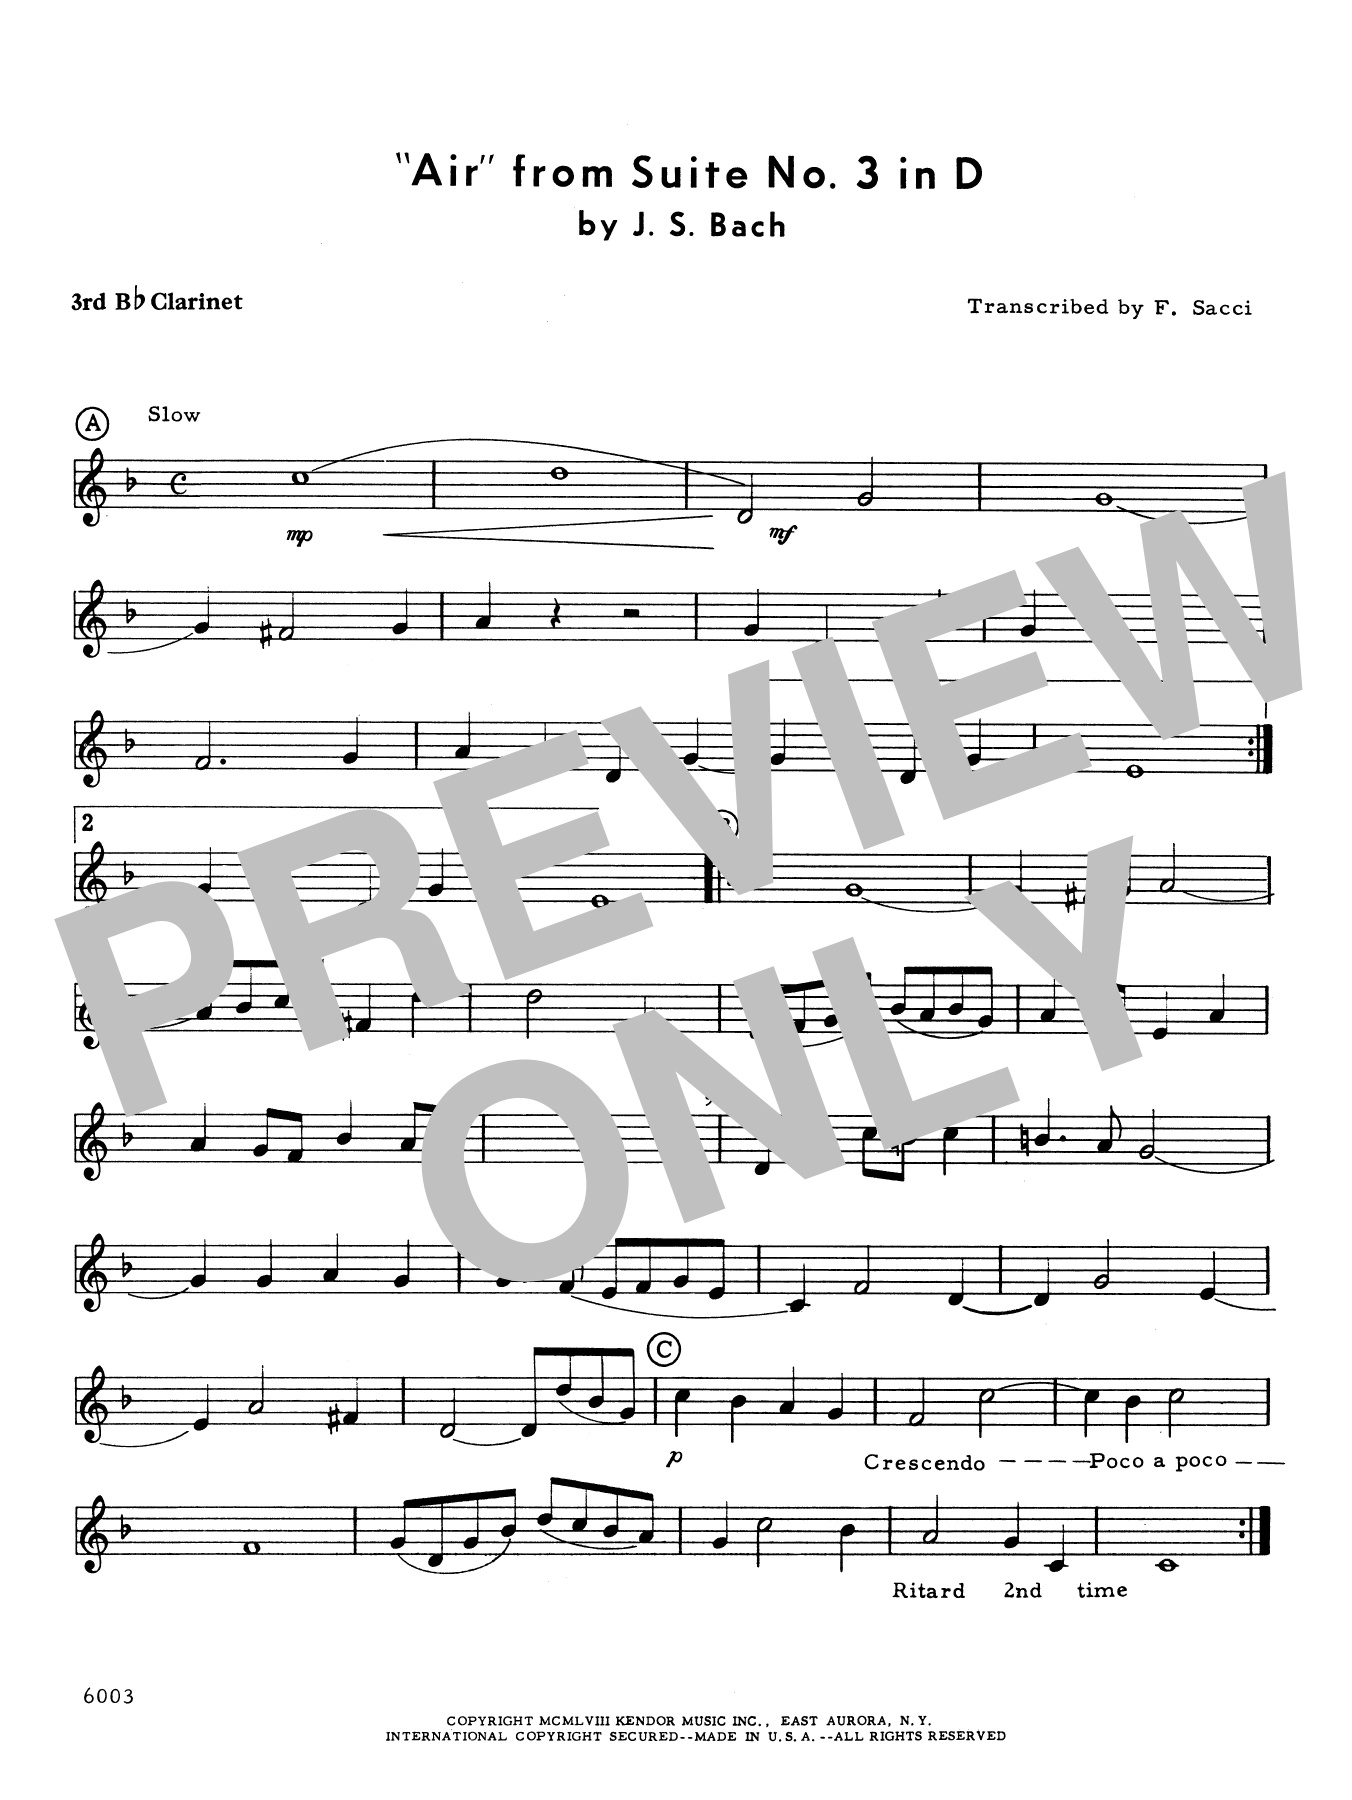 Download Frank J. Sacci Air From Suite #3 In D - 3rd Bb Clarine Sheet Music